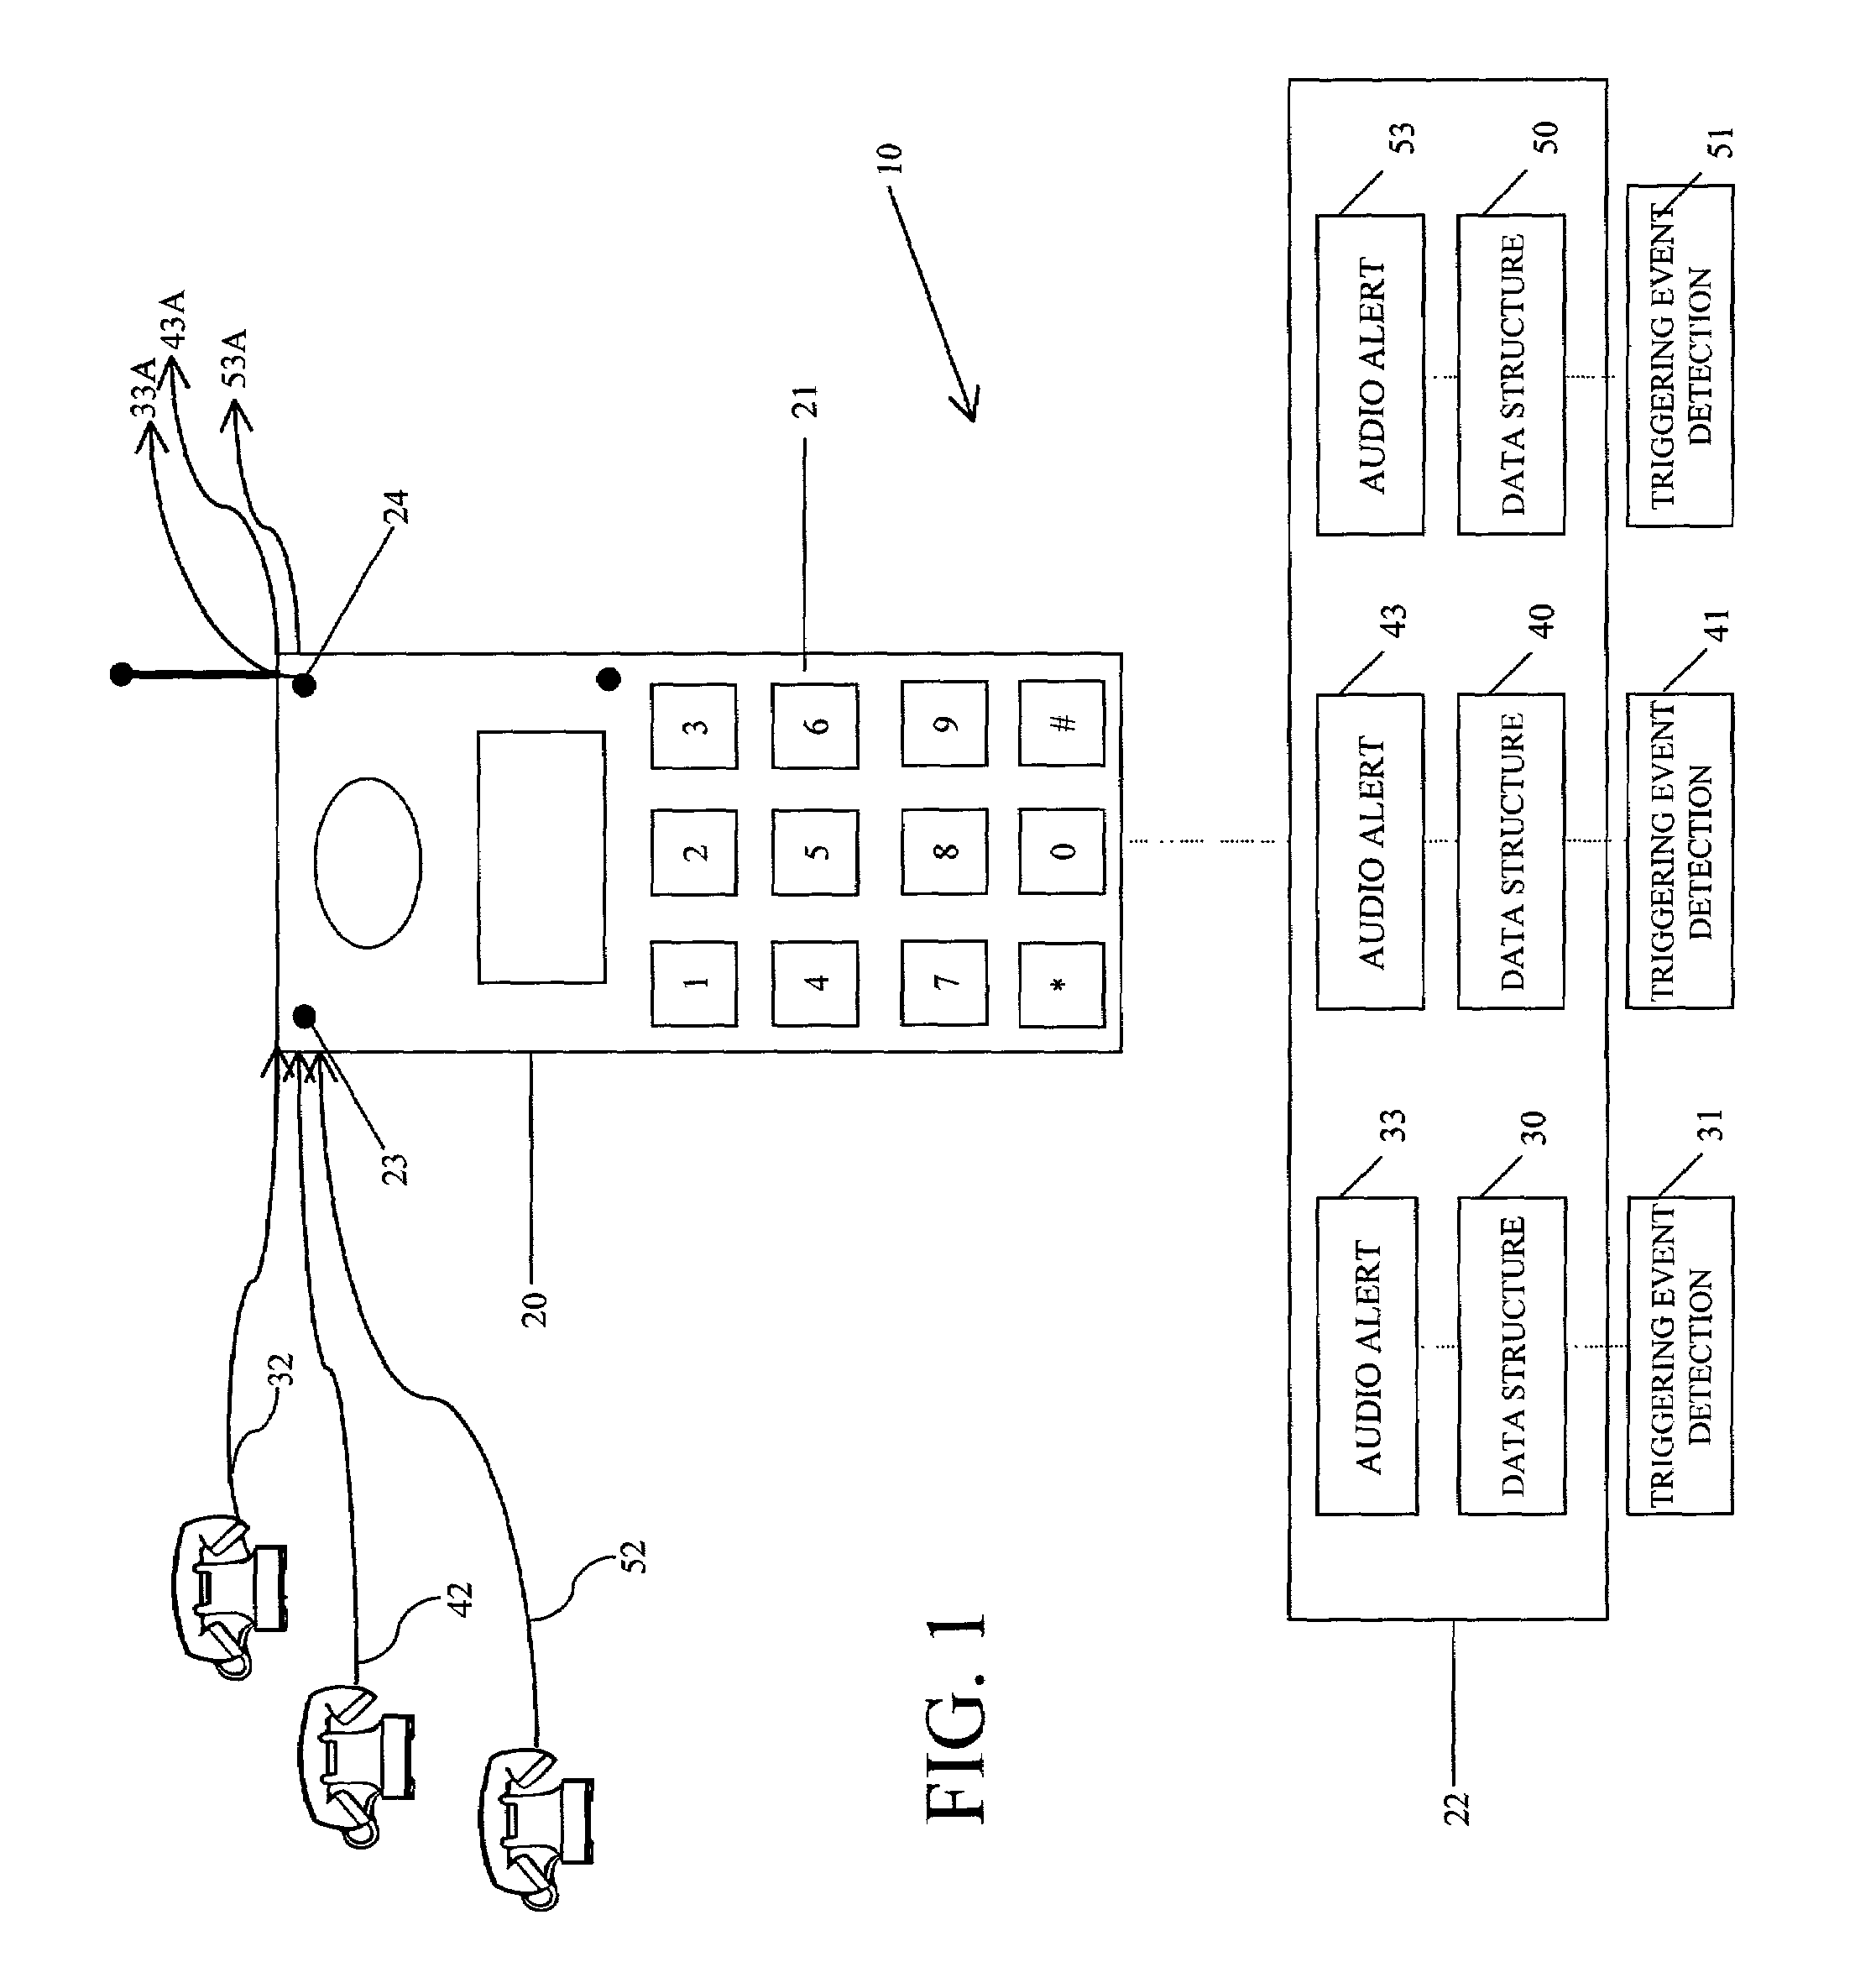 Programmable audio alert system and method